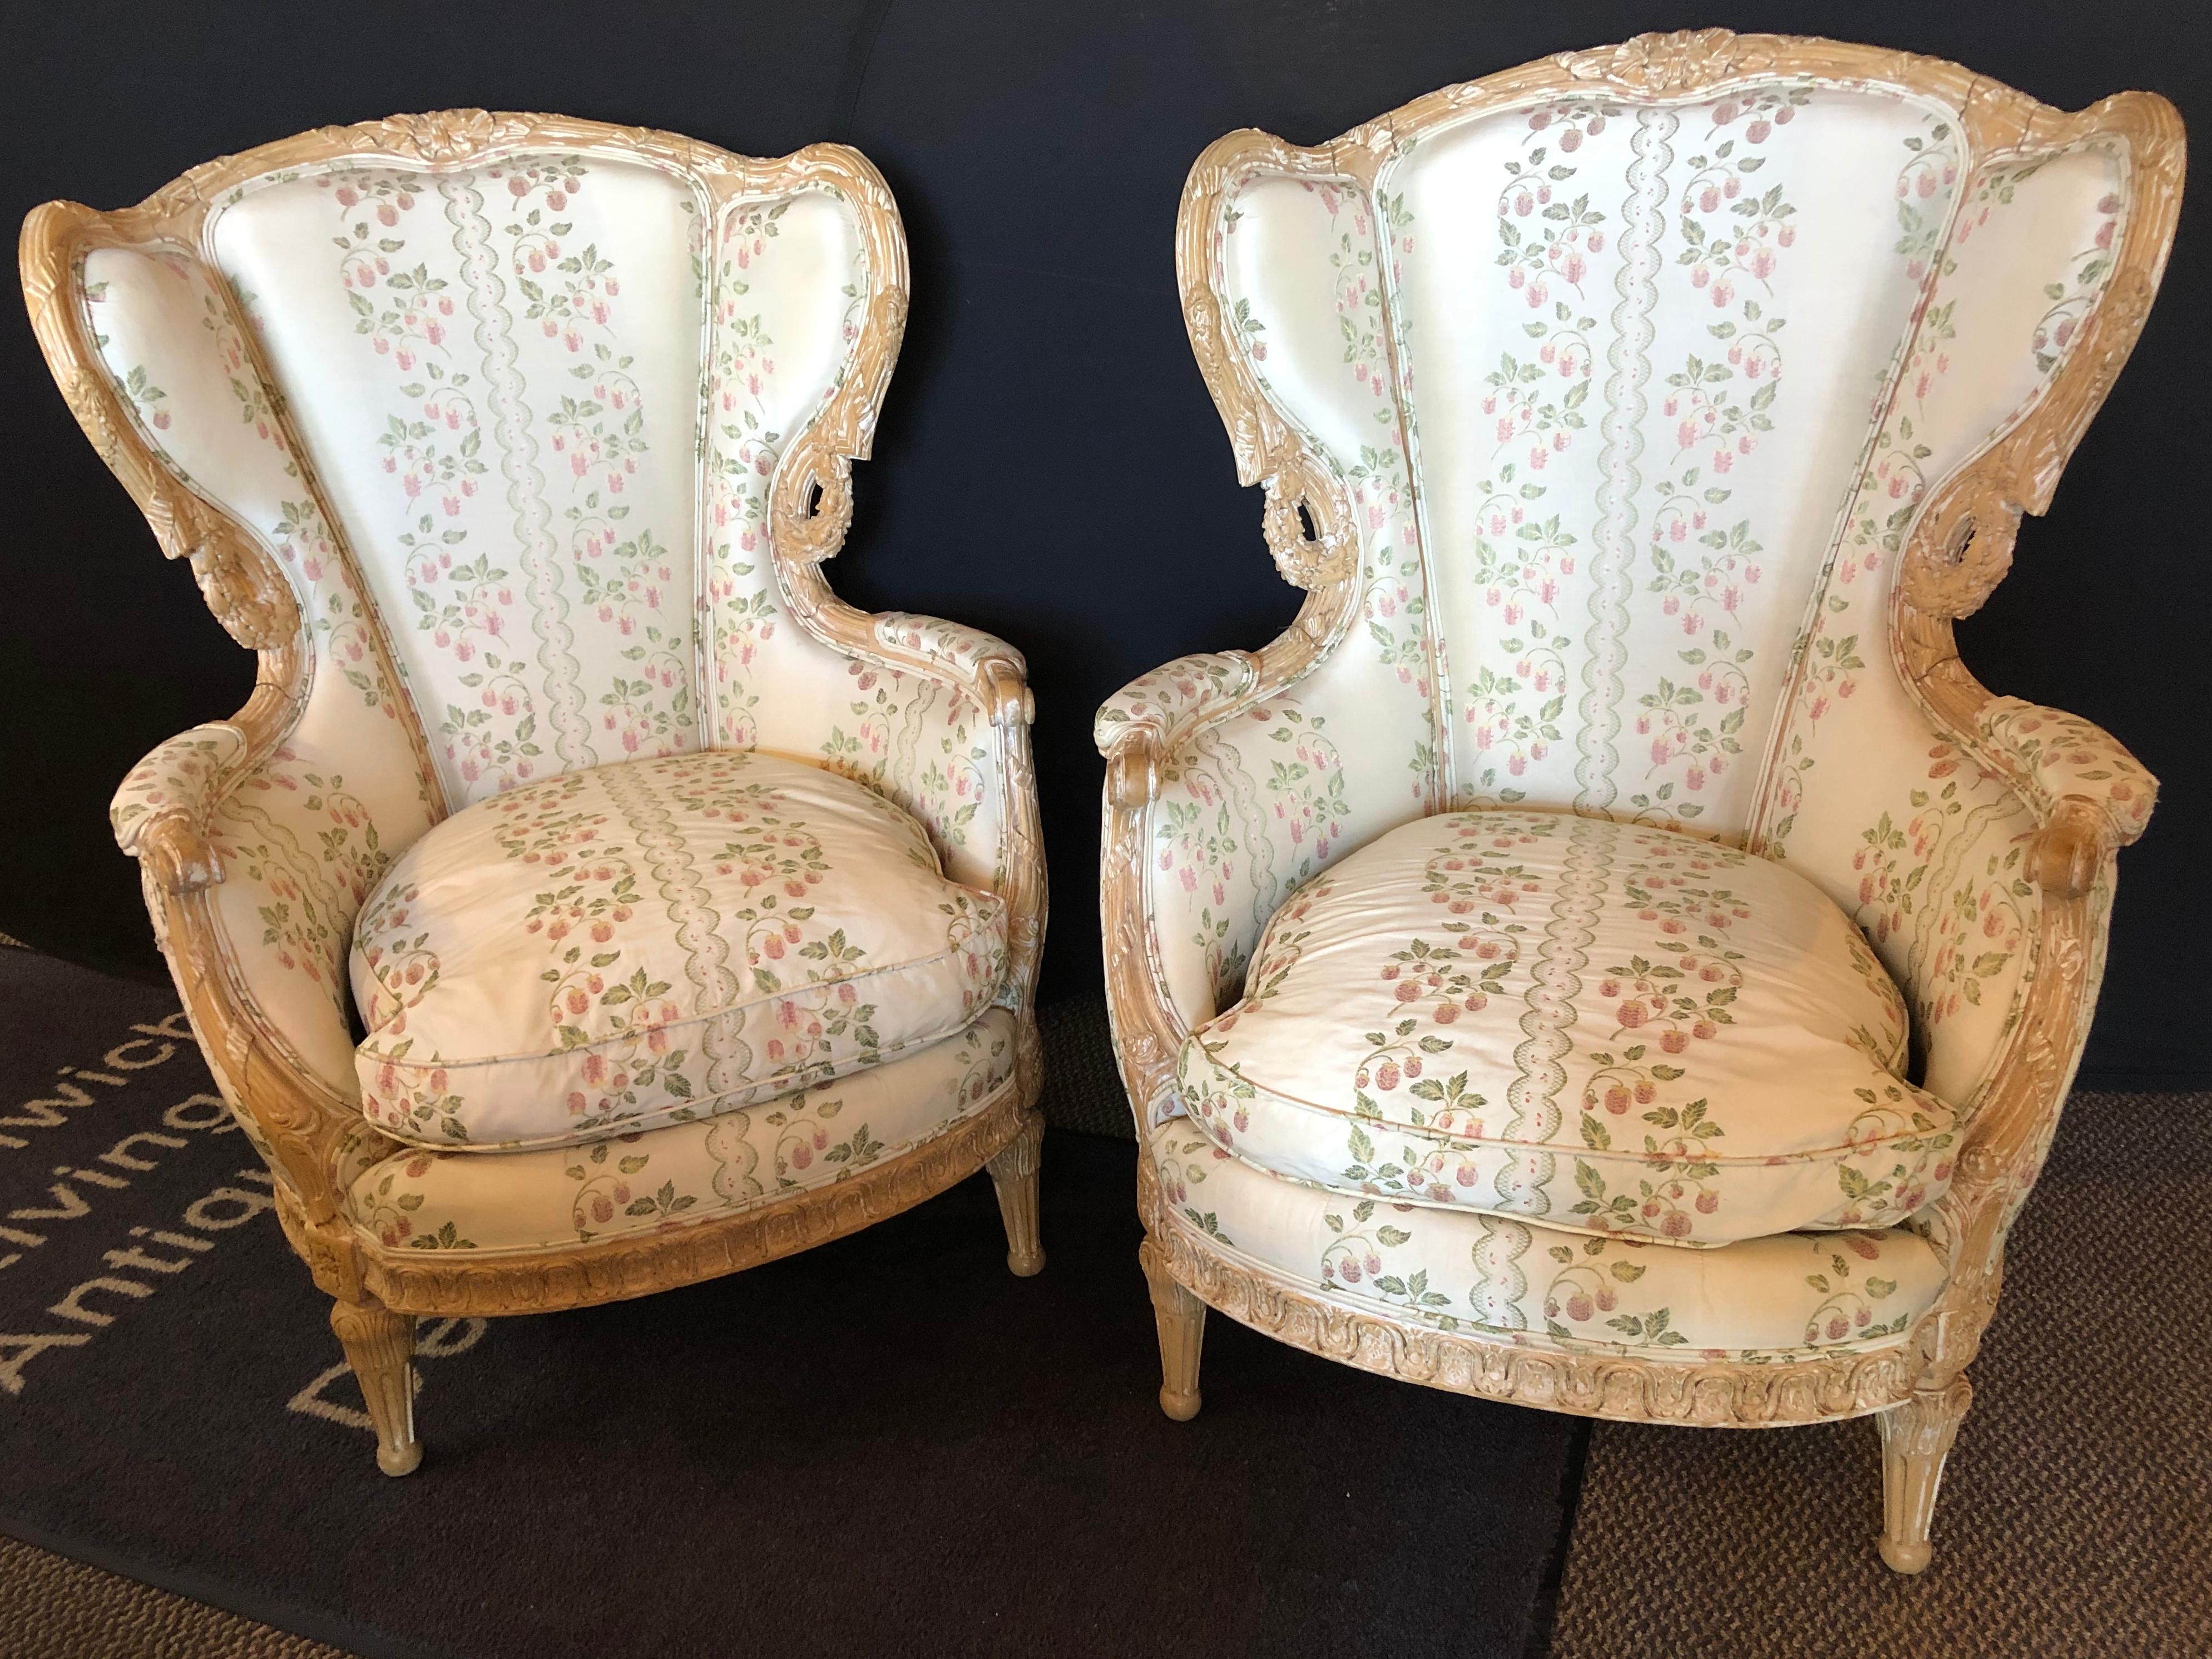 Pair of large impressive high back distressed carved framed wing back armchairs in a fine fabric.